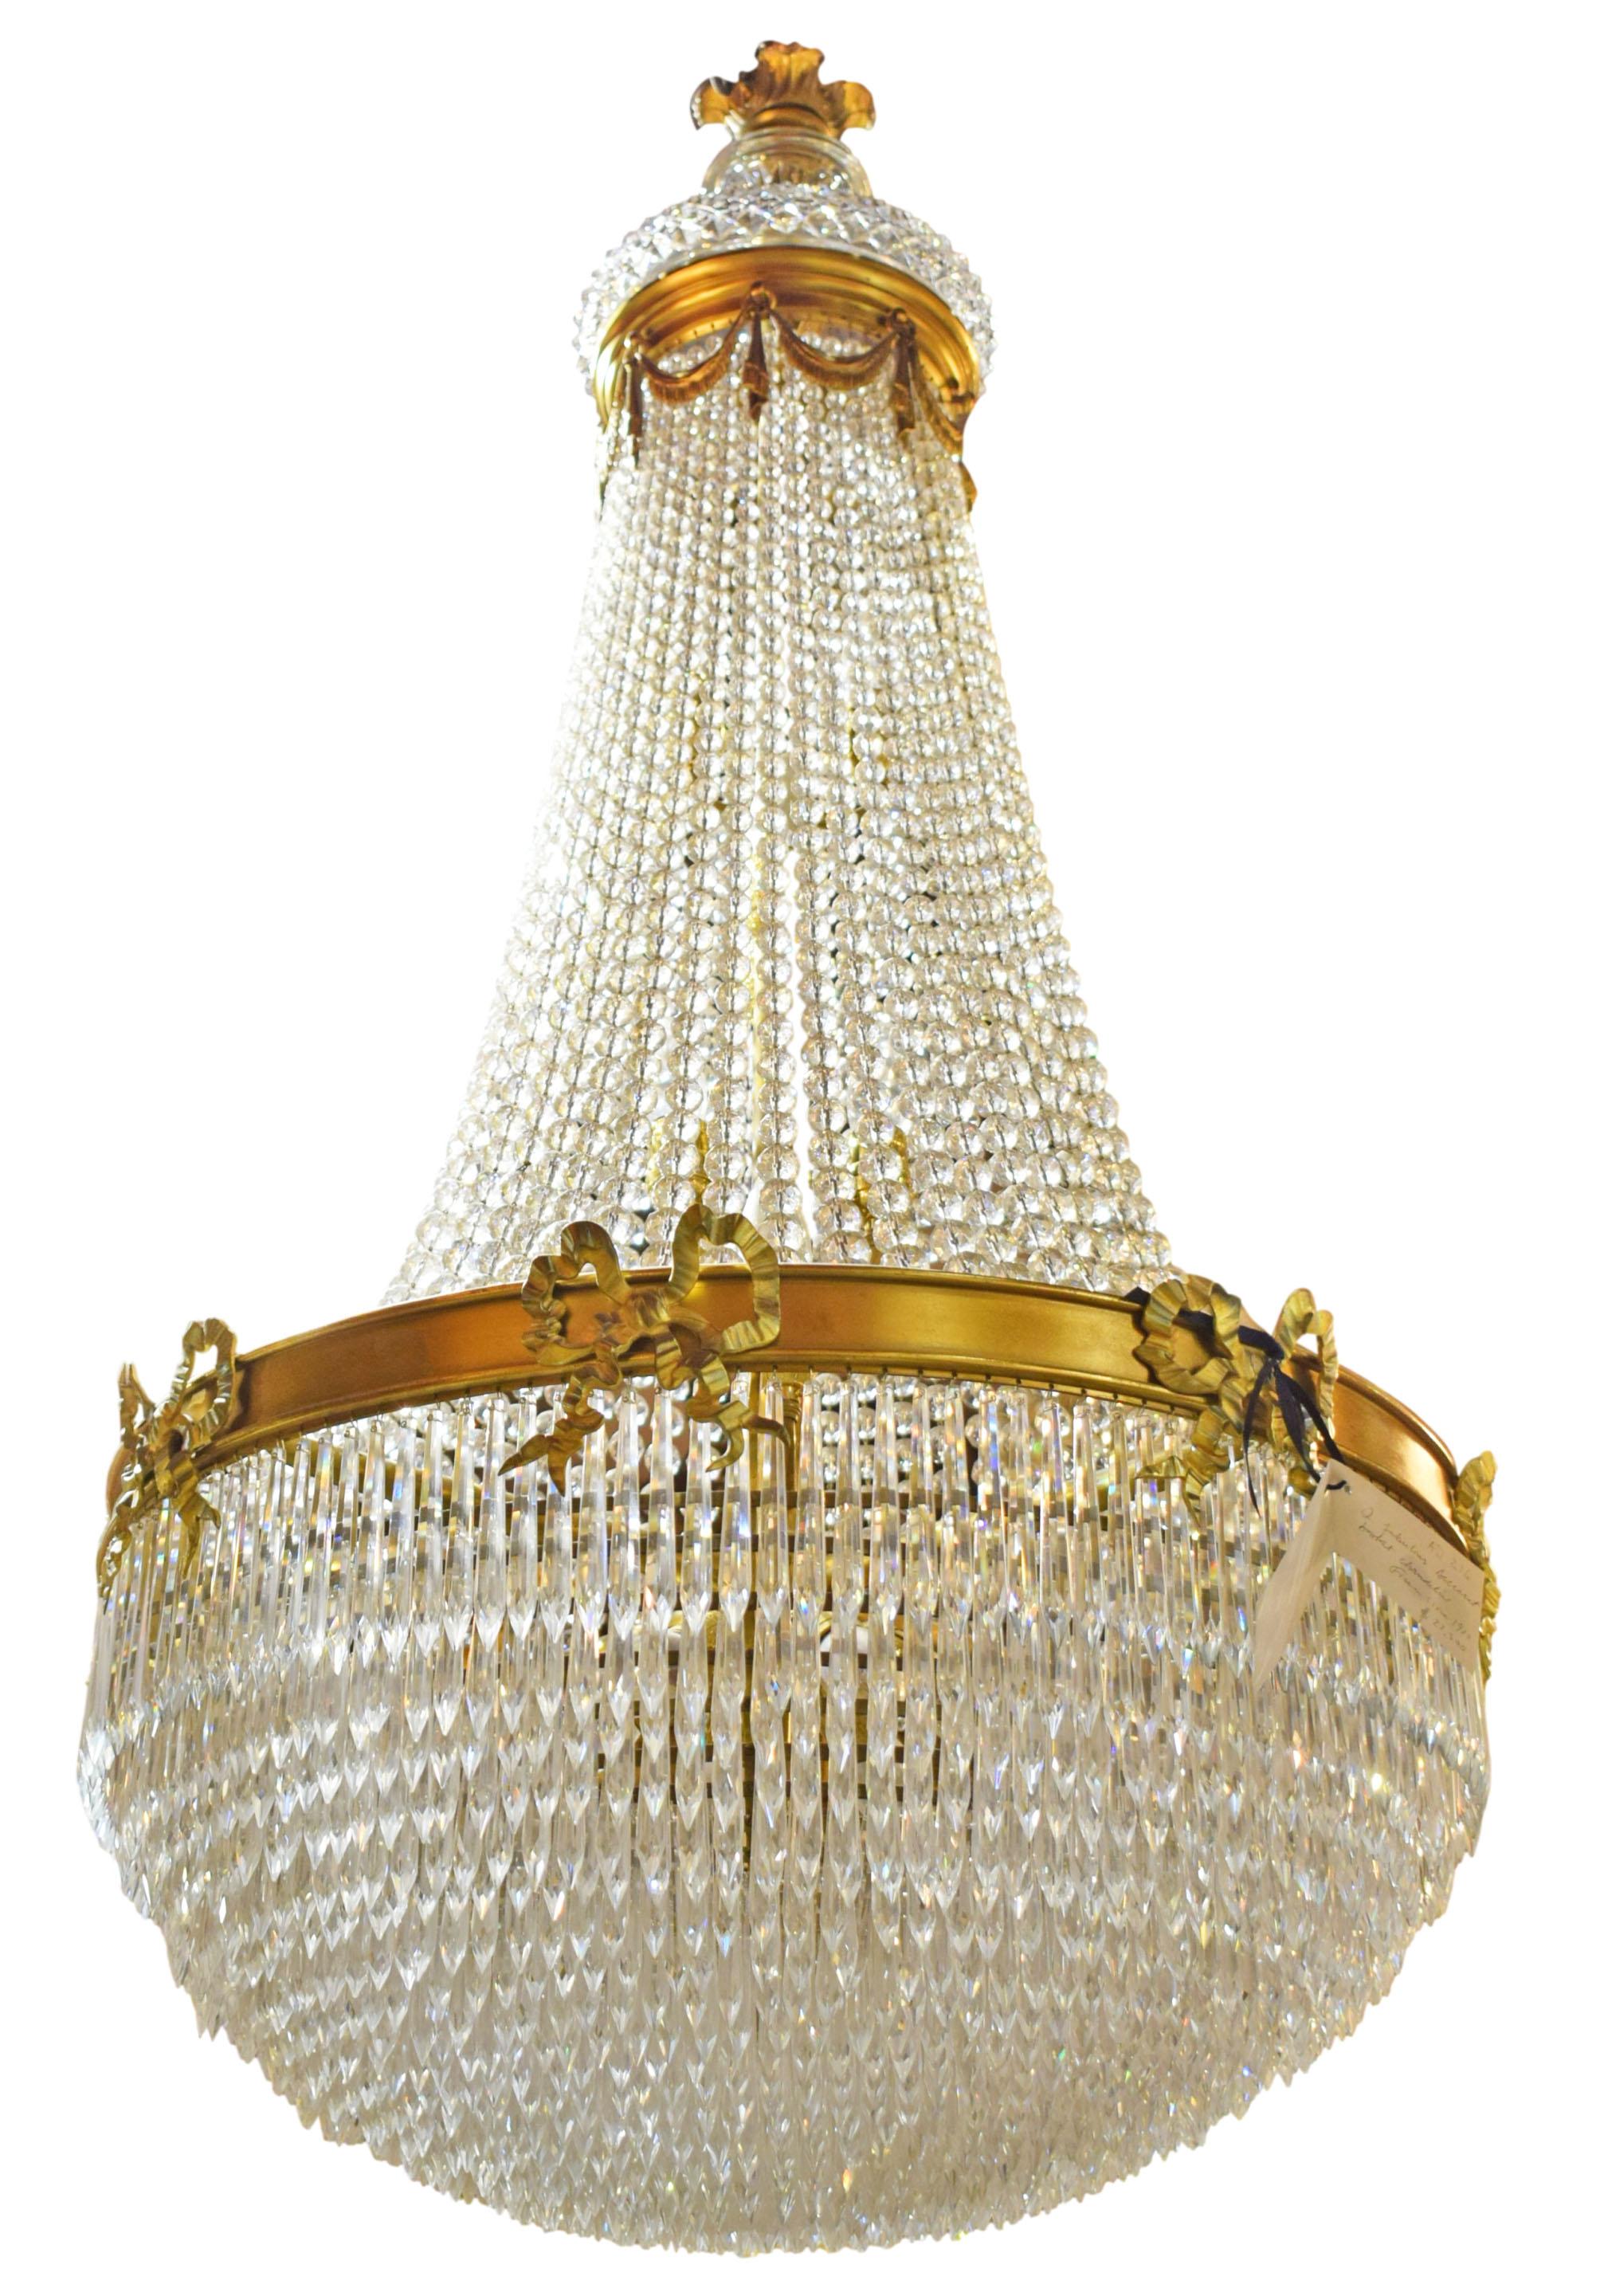 Very fine gilt bronze and crystal basket style chandelier by Baccarat, France circa 1900.  14 Lights.
Dimensions: Height 50